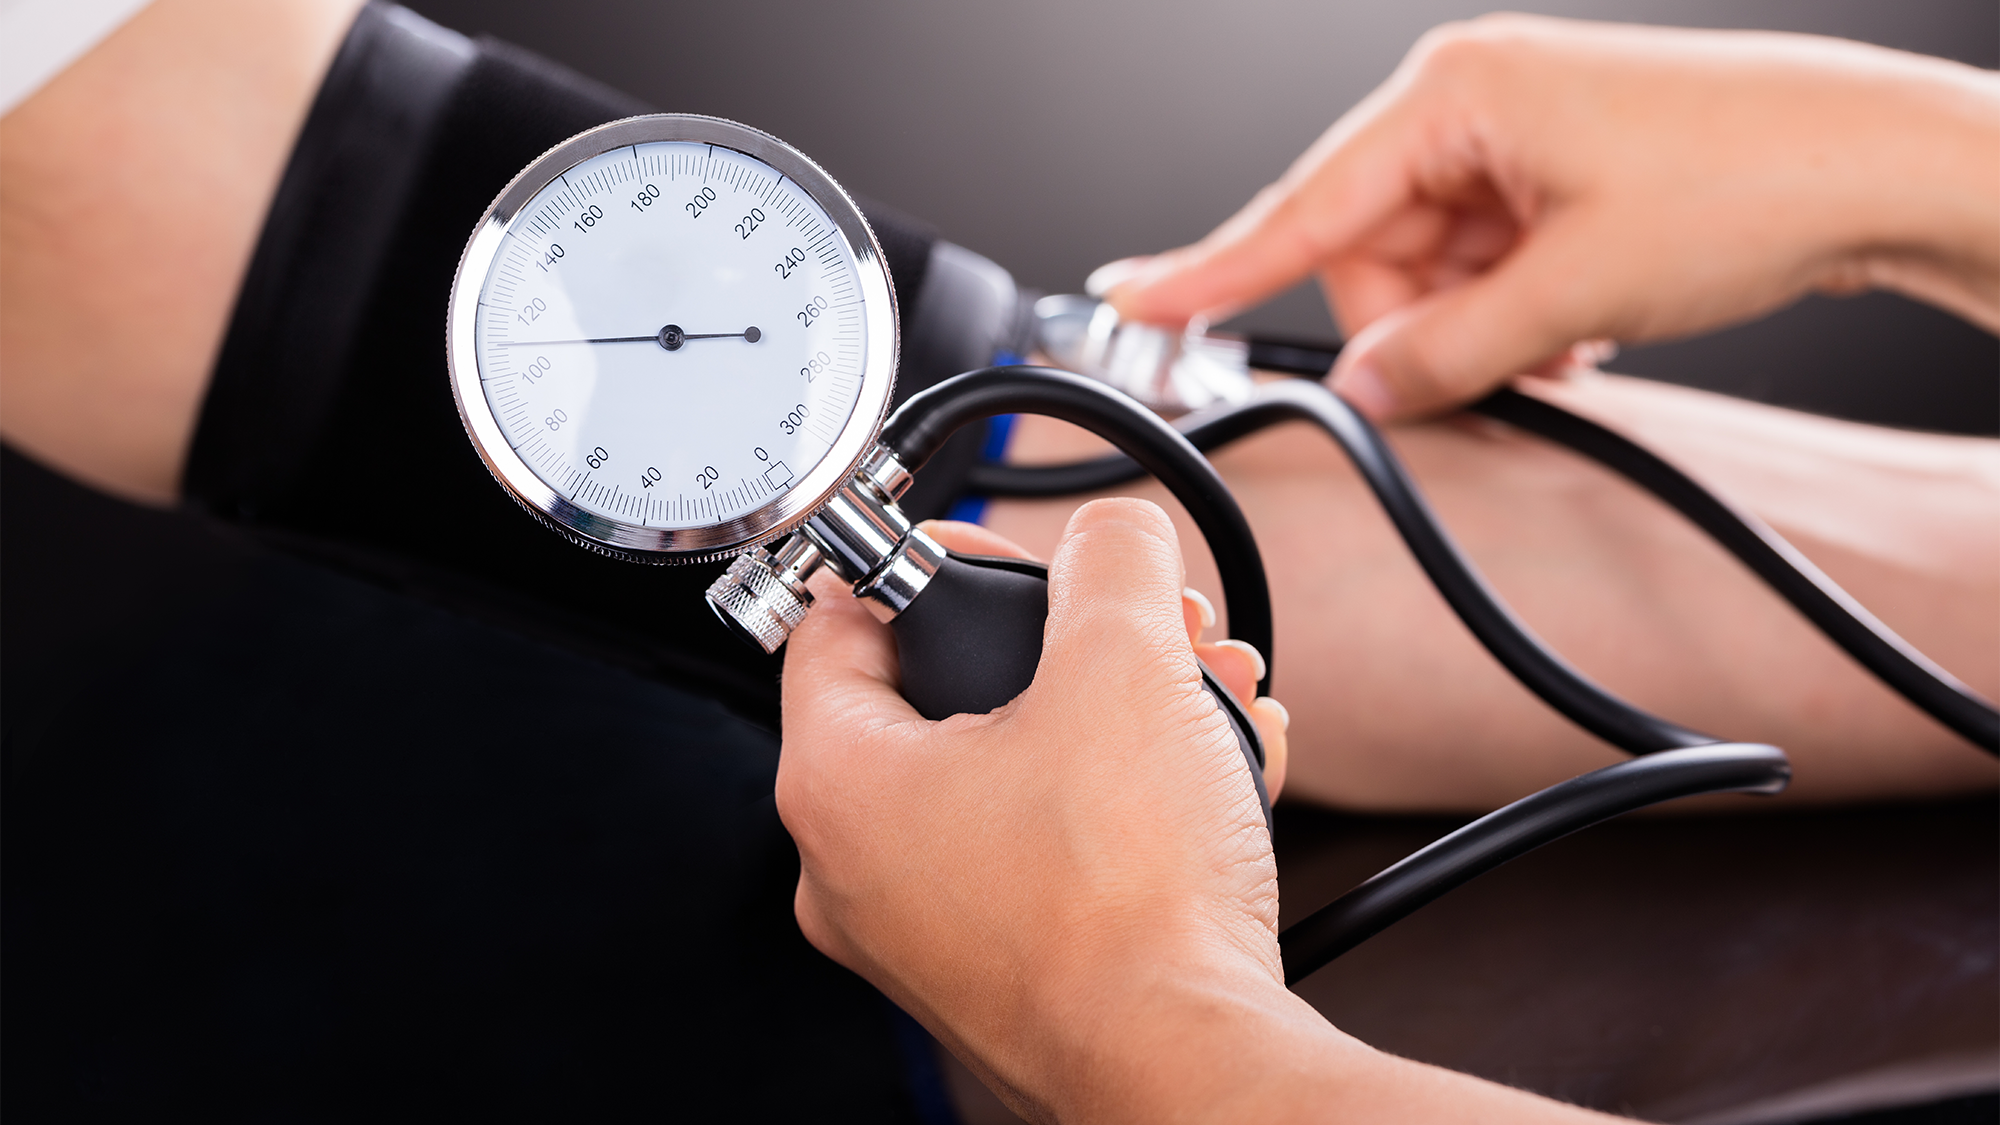 Treating high blood pressure can save 76 million lives in 30 years, WHO says thumbnail